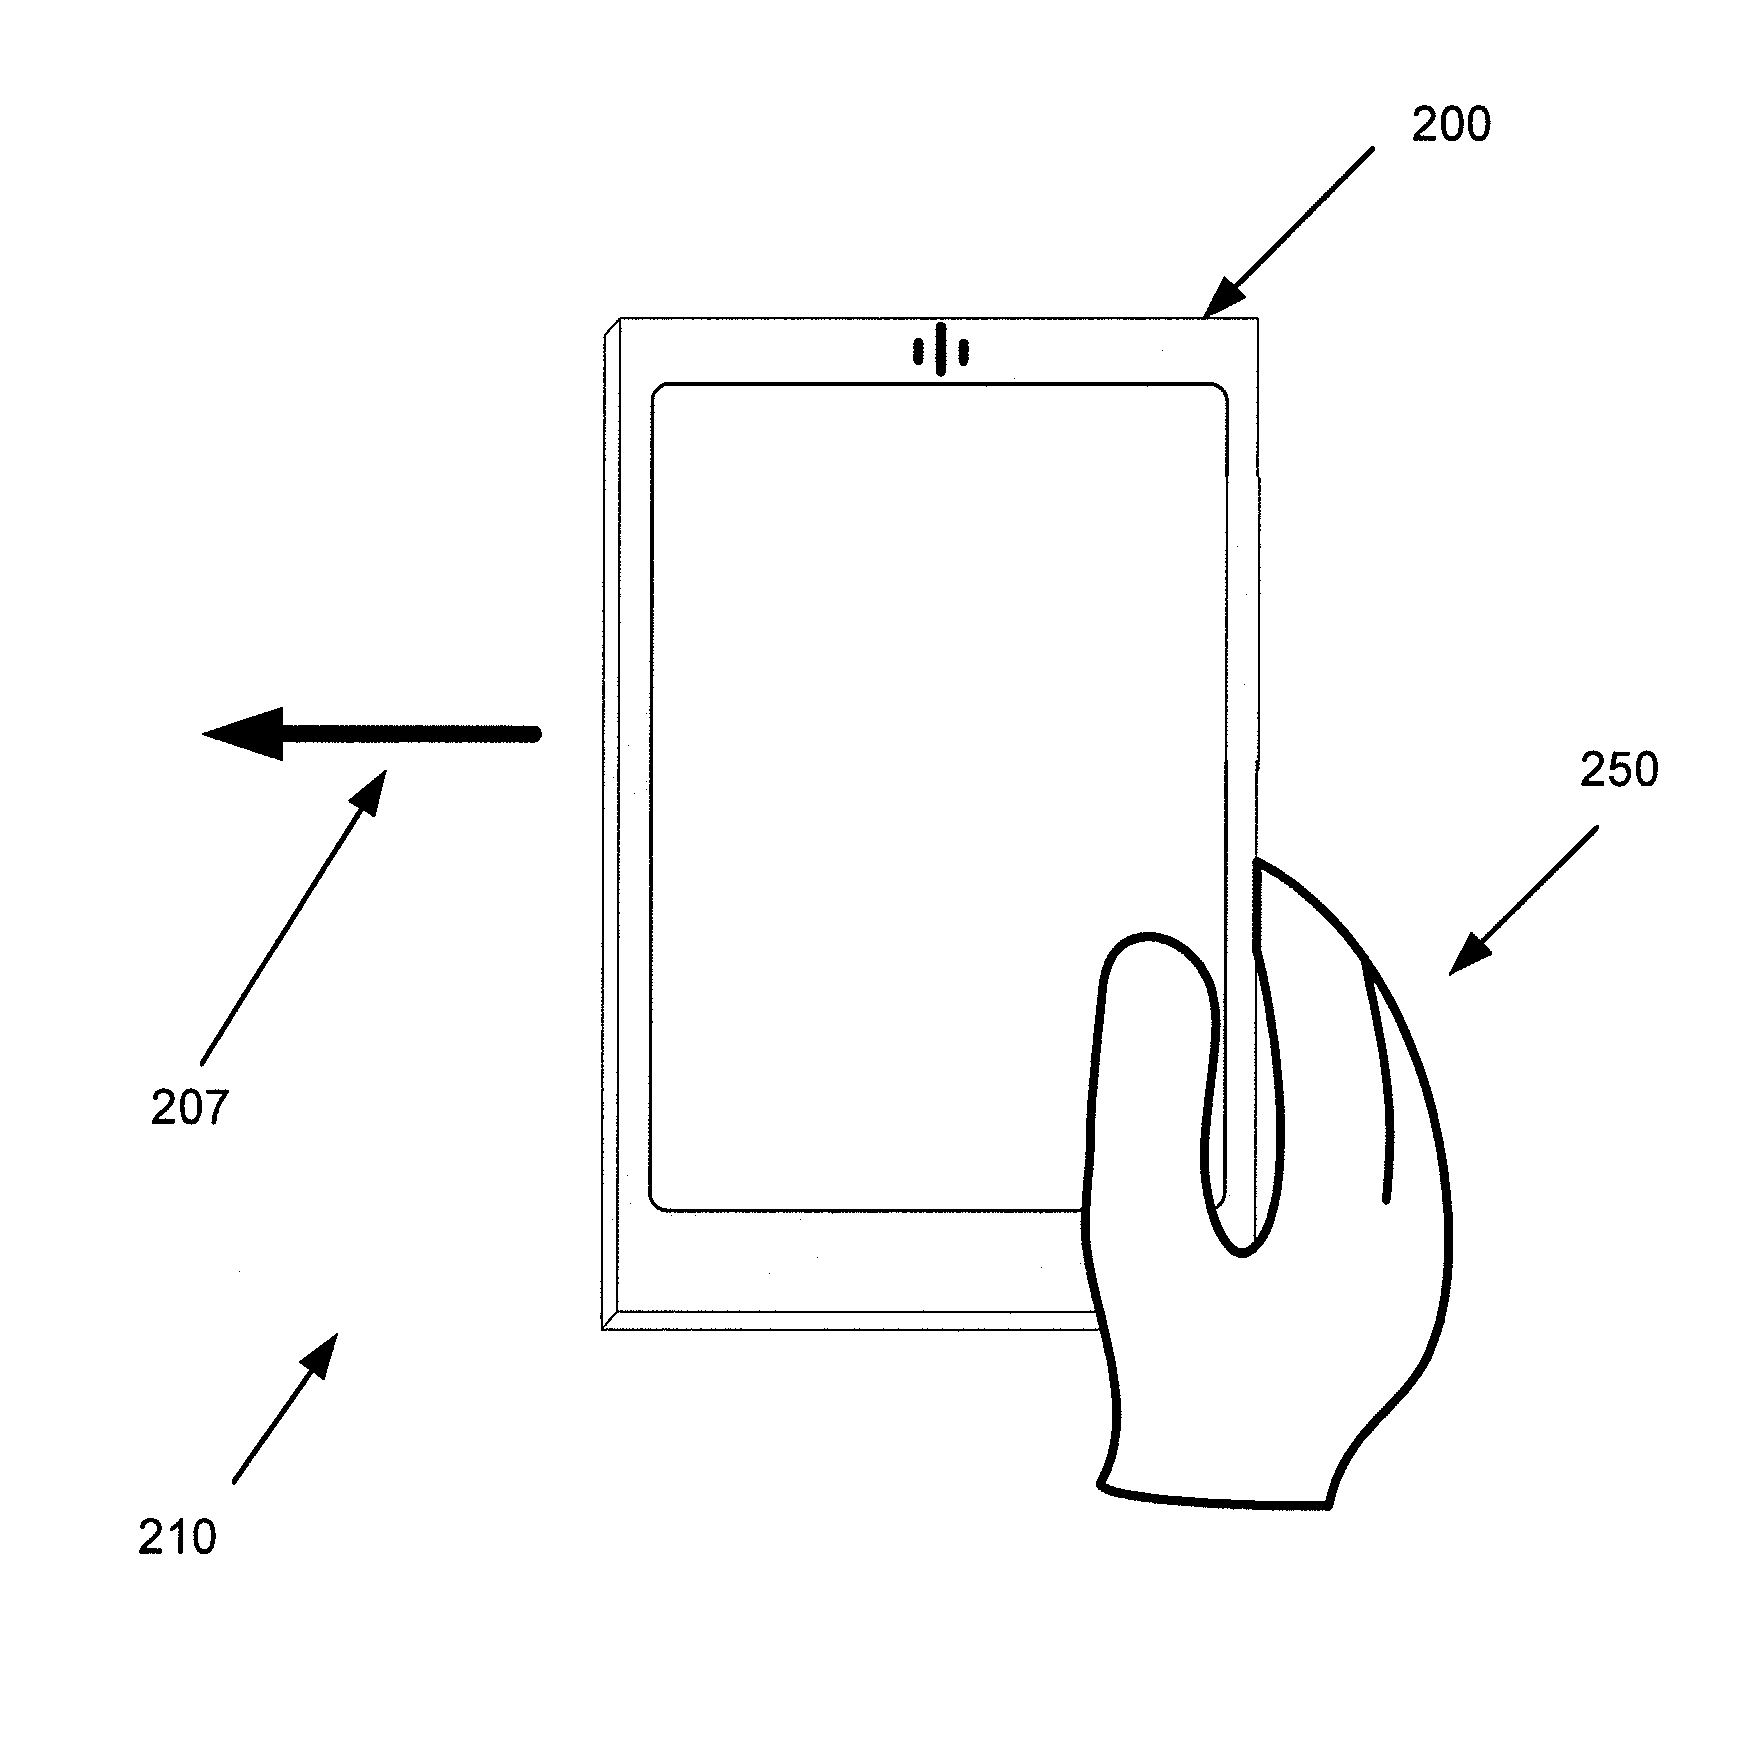 Methods, apparatuses, and computer program products for enabling use of remote devices with pre-defined gestures